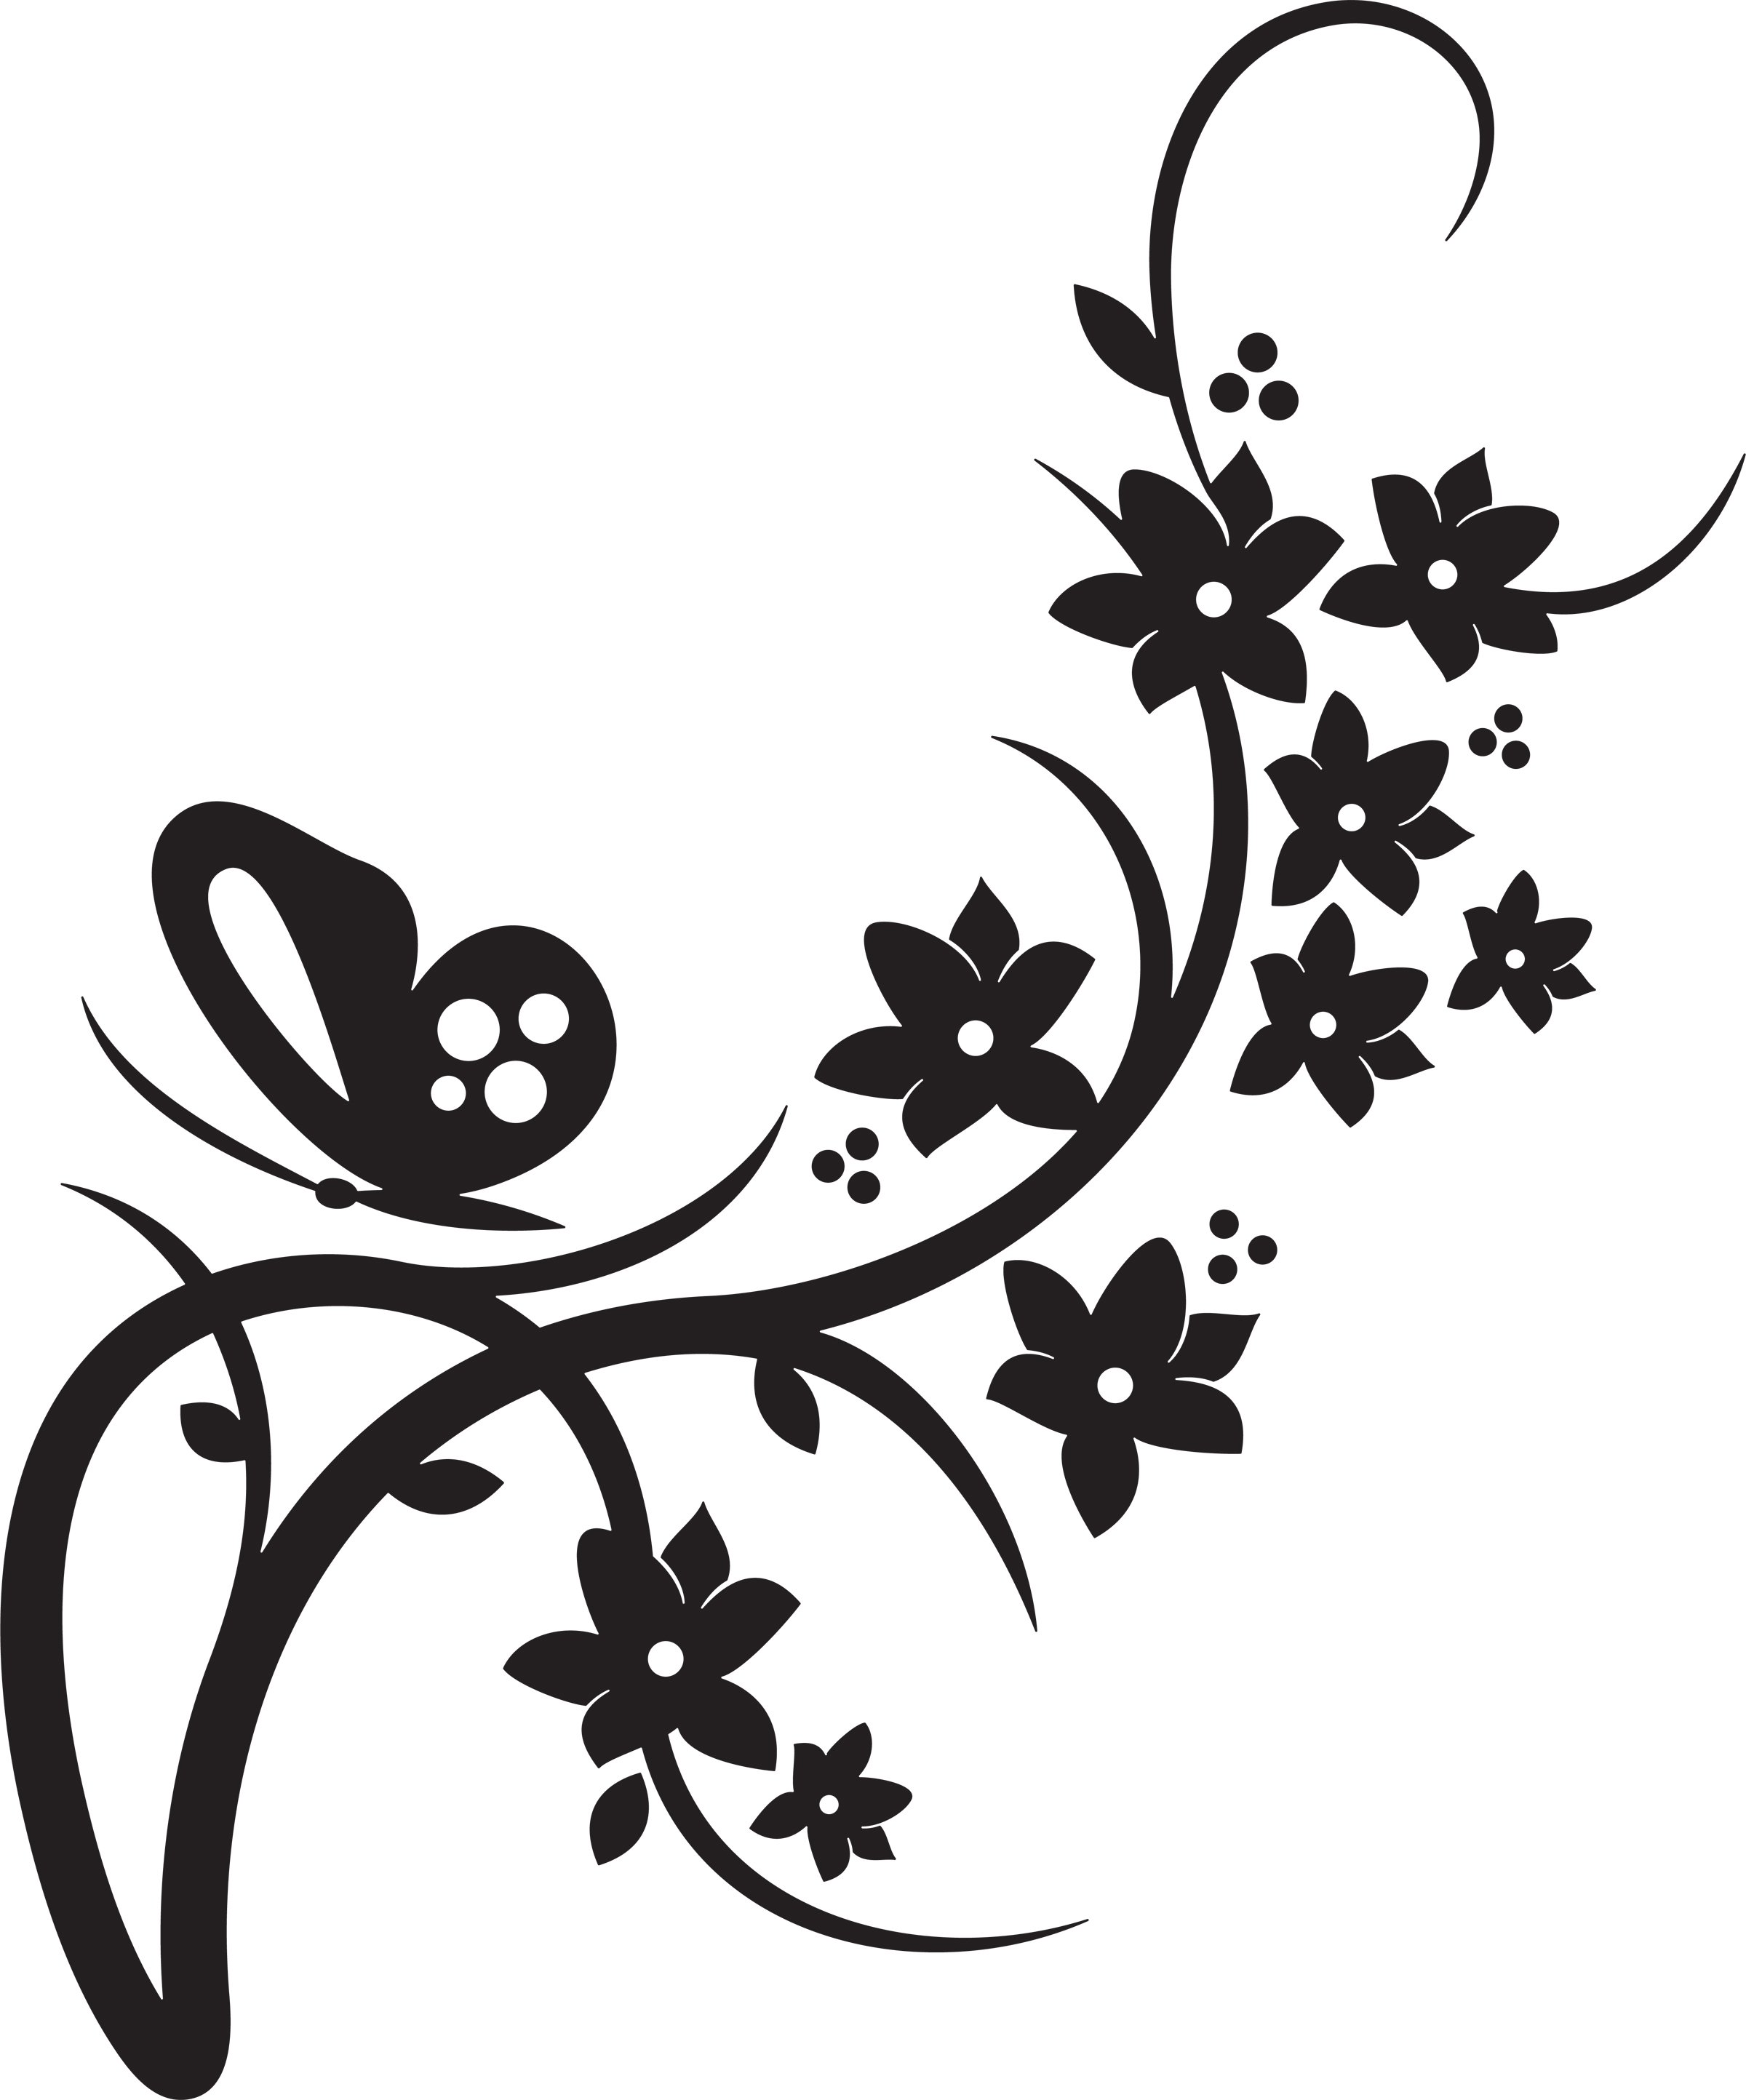 cliparts free download - Wedding Clipart Free Download